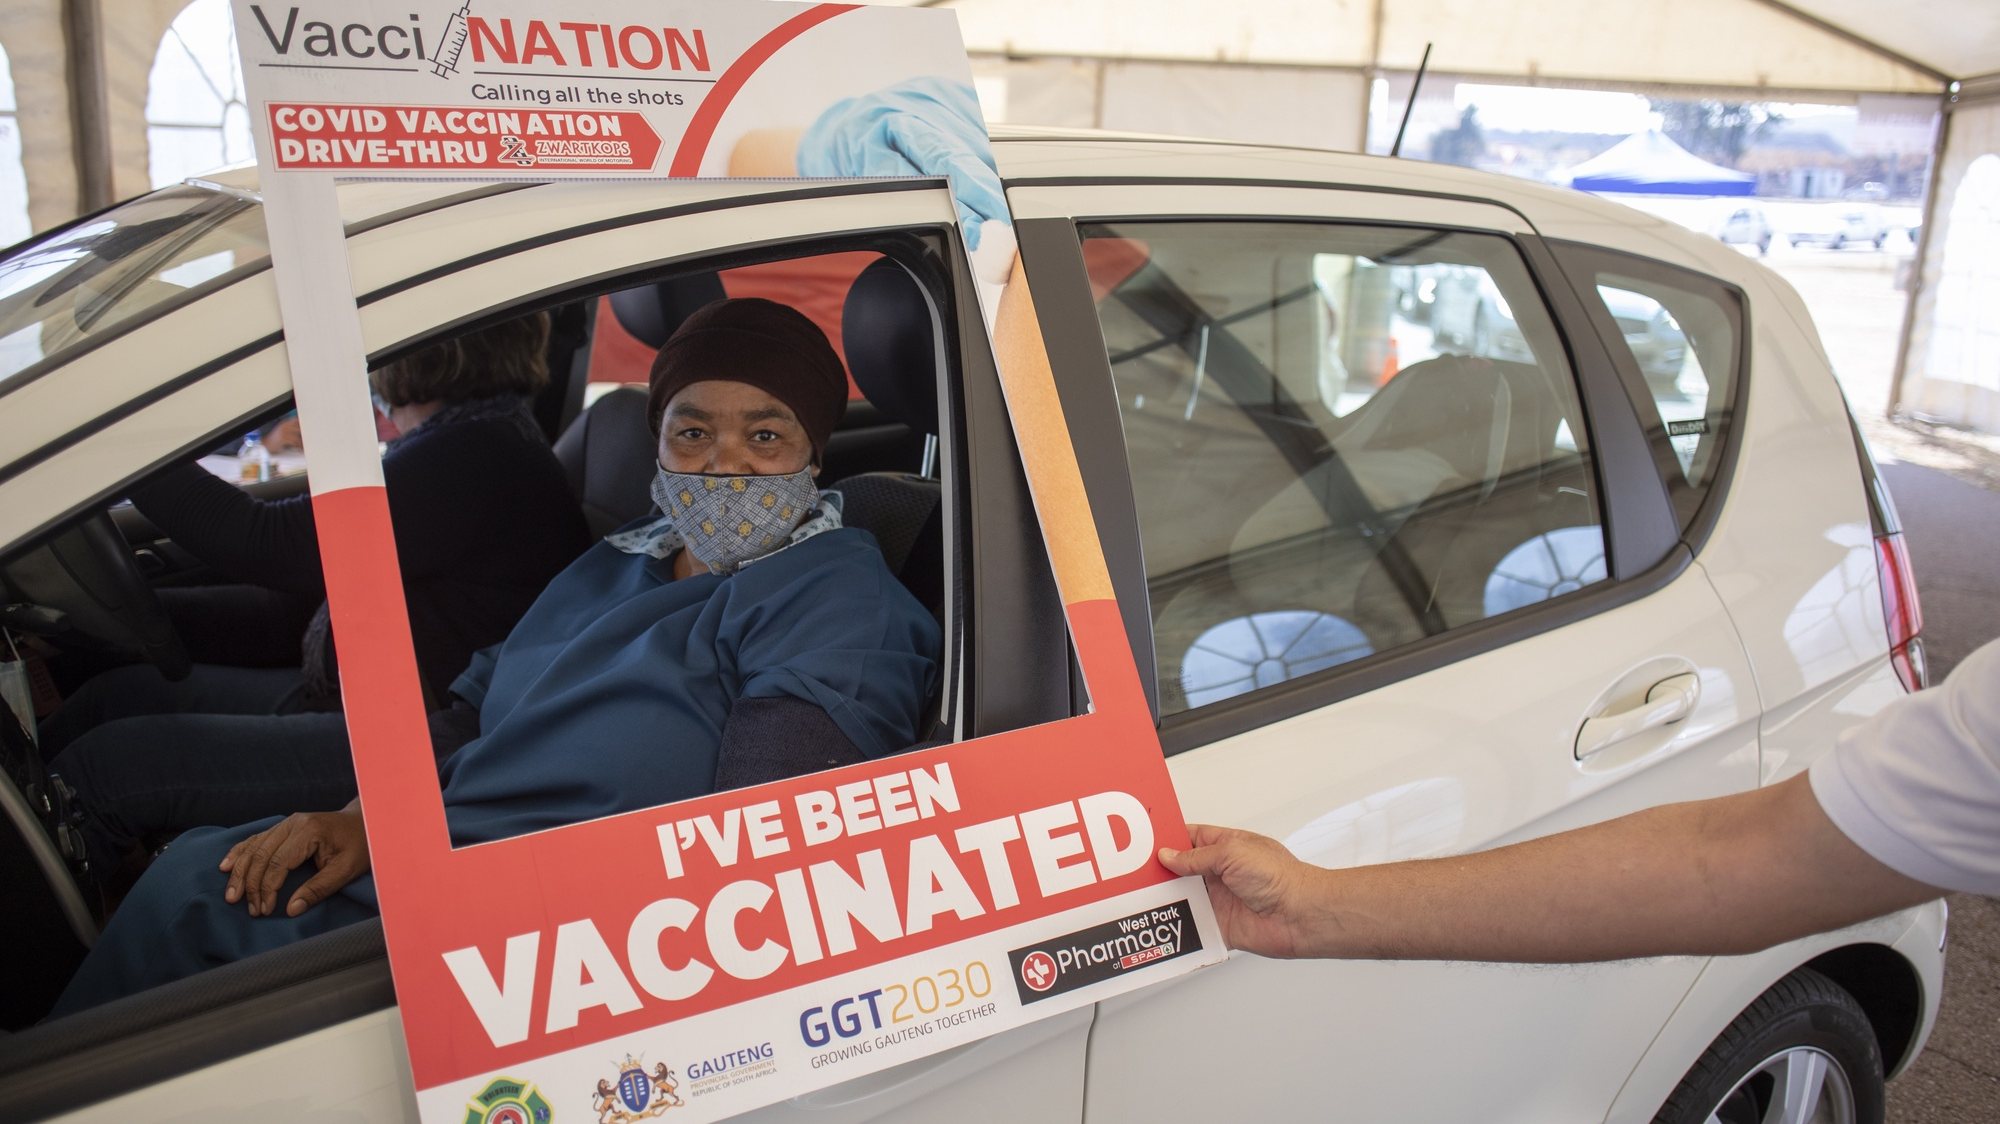 epa09418882 A person has her vaccine administered at a drive through Covid-19 coronavirus vaccination site at the Swartkops Raceway in Pretoria, South Africa, 18 August 2021. South Africa has to date vaccinated 17 percent of the population and is aiming at starting vaccinations for over 18 year olds in the next weeks.  EPA/KIM LUDBROOK